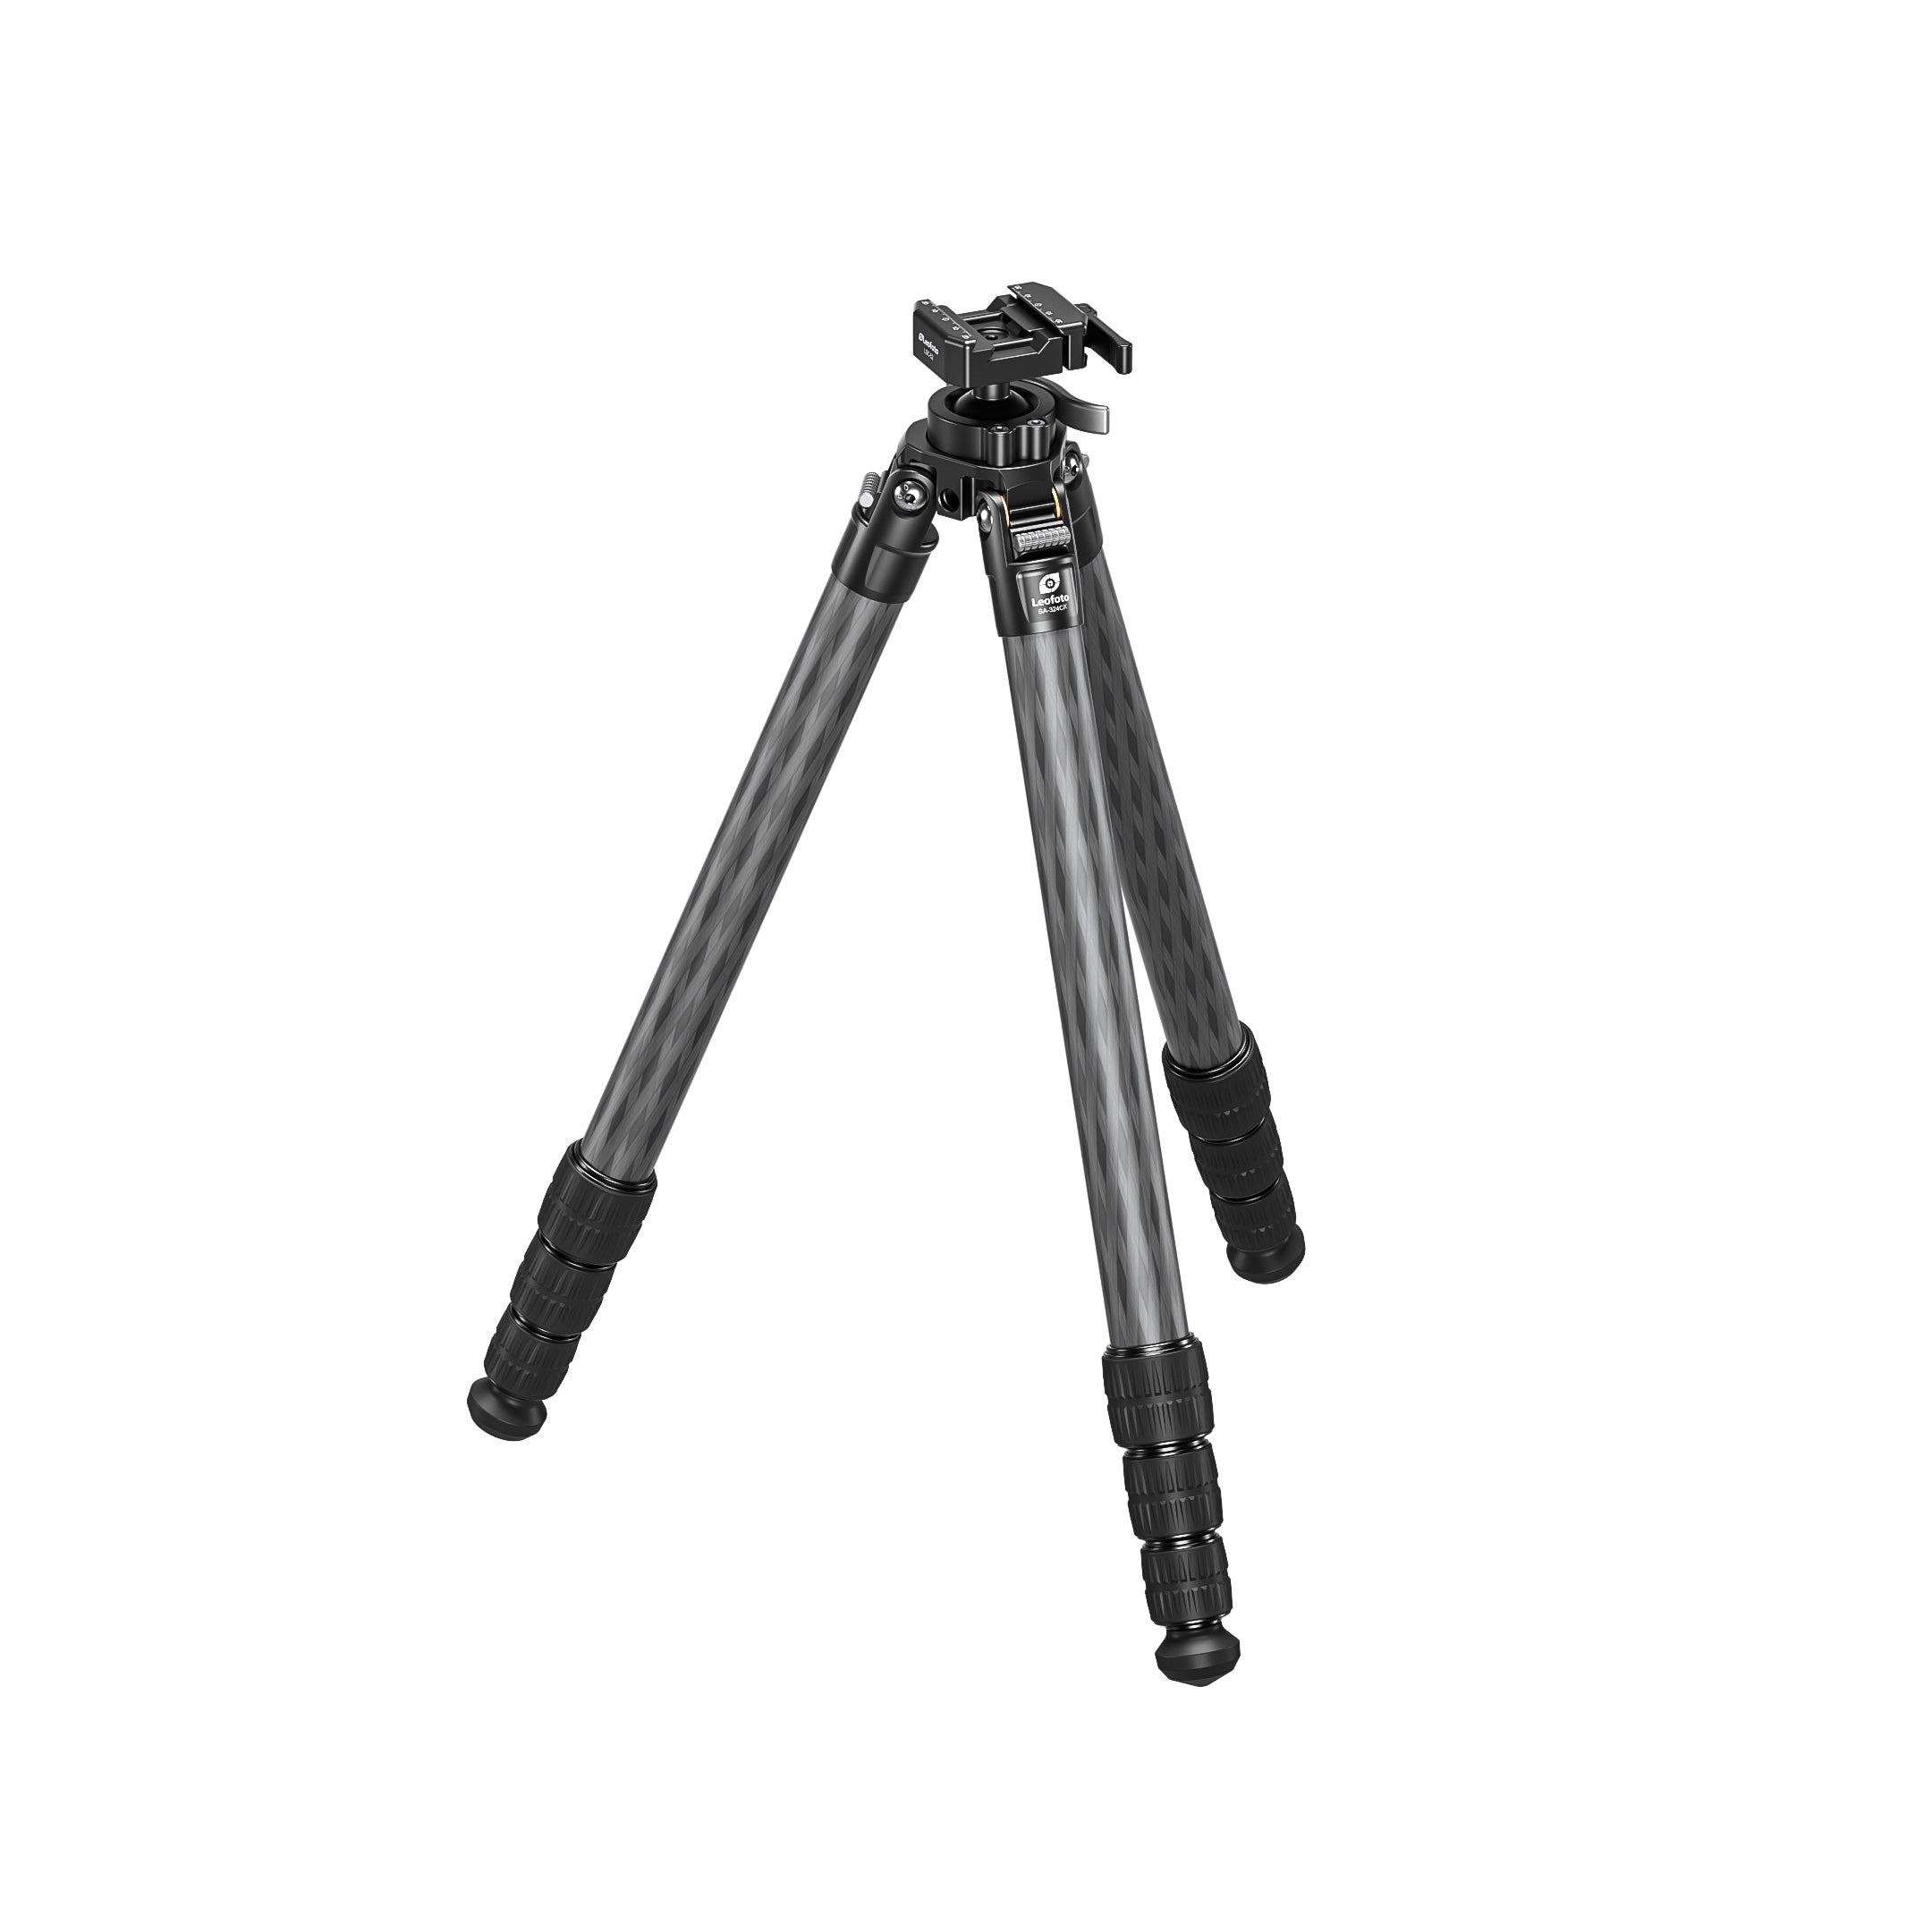 Leofoto ST-X Outdoors Tripod with Integrated Lever-Control Ballhead | Lever-Release Clamp